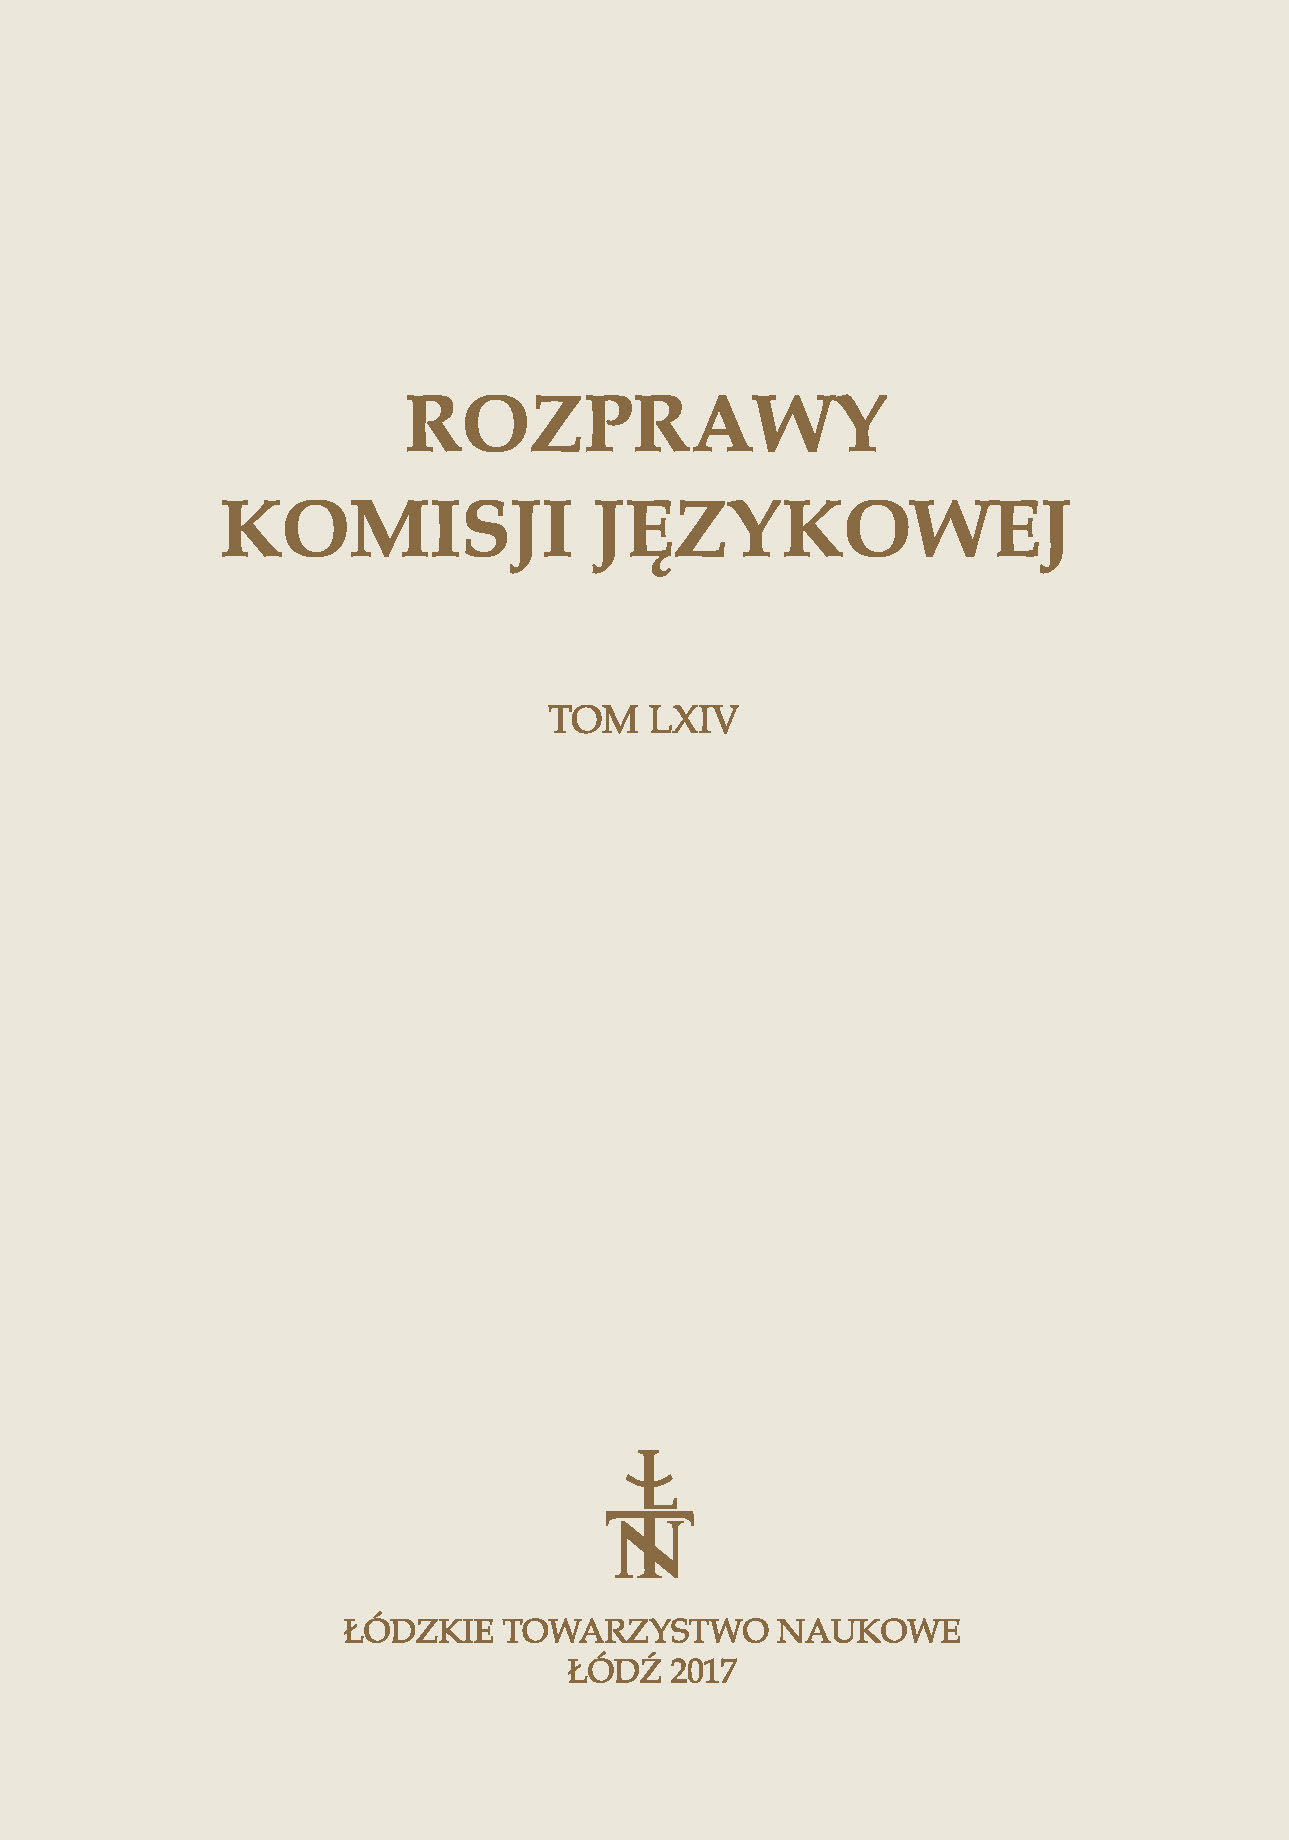 Functioning of East Slavonic borrowings in the user awareness of Polish south-eastern local dialects on the example of adverbs Cover Image